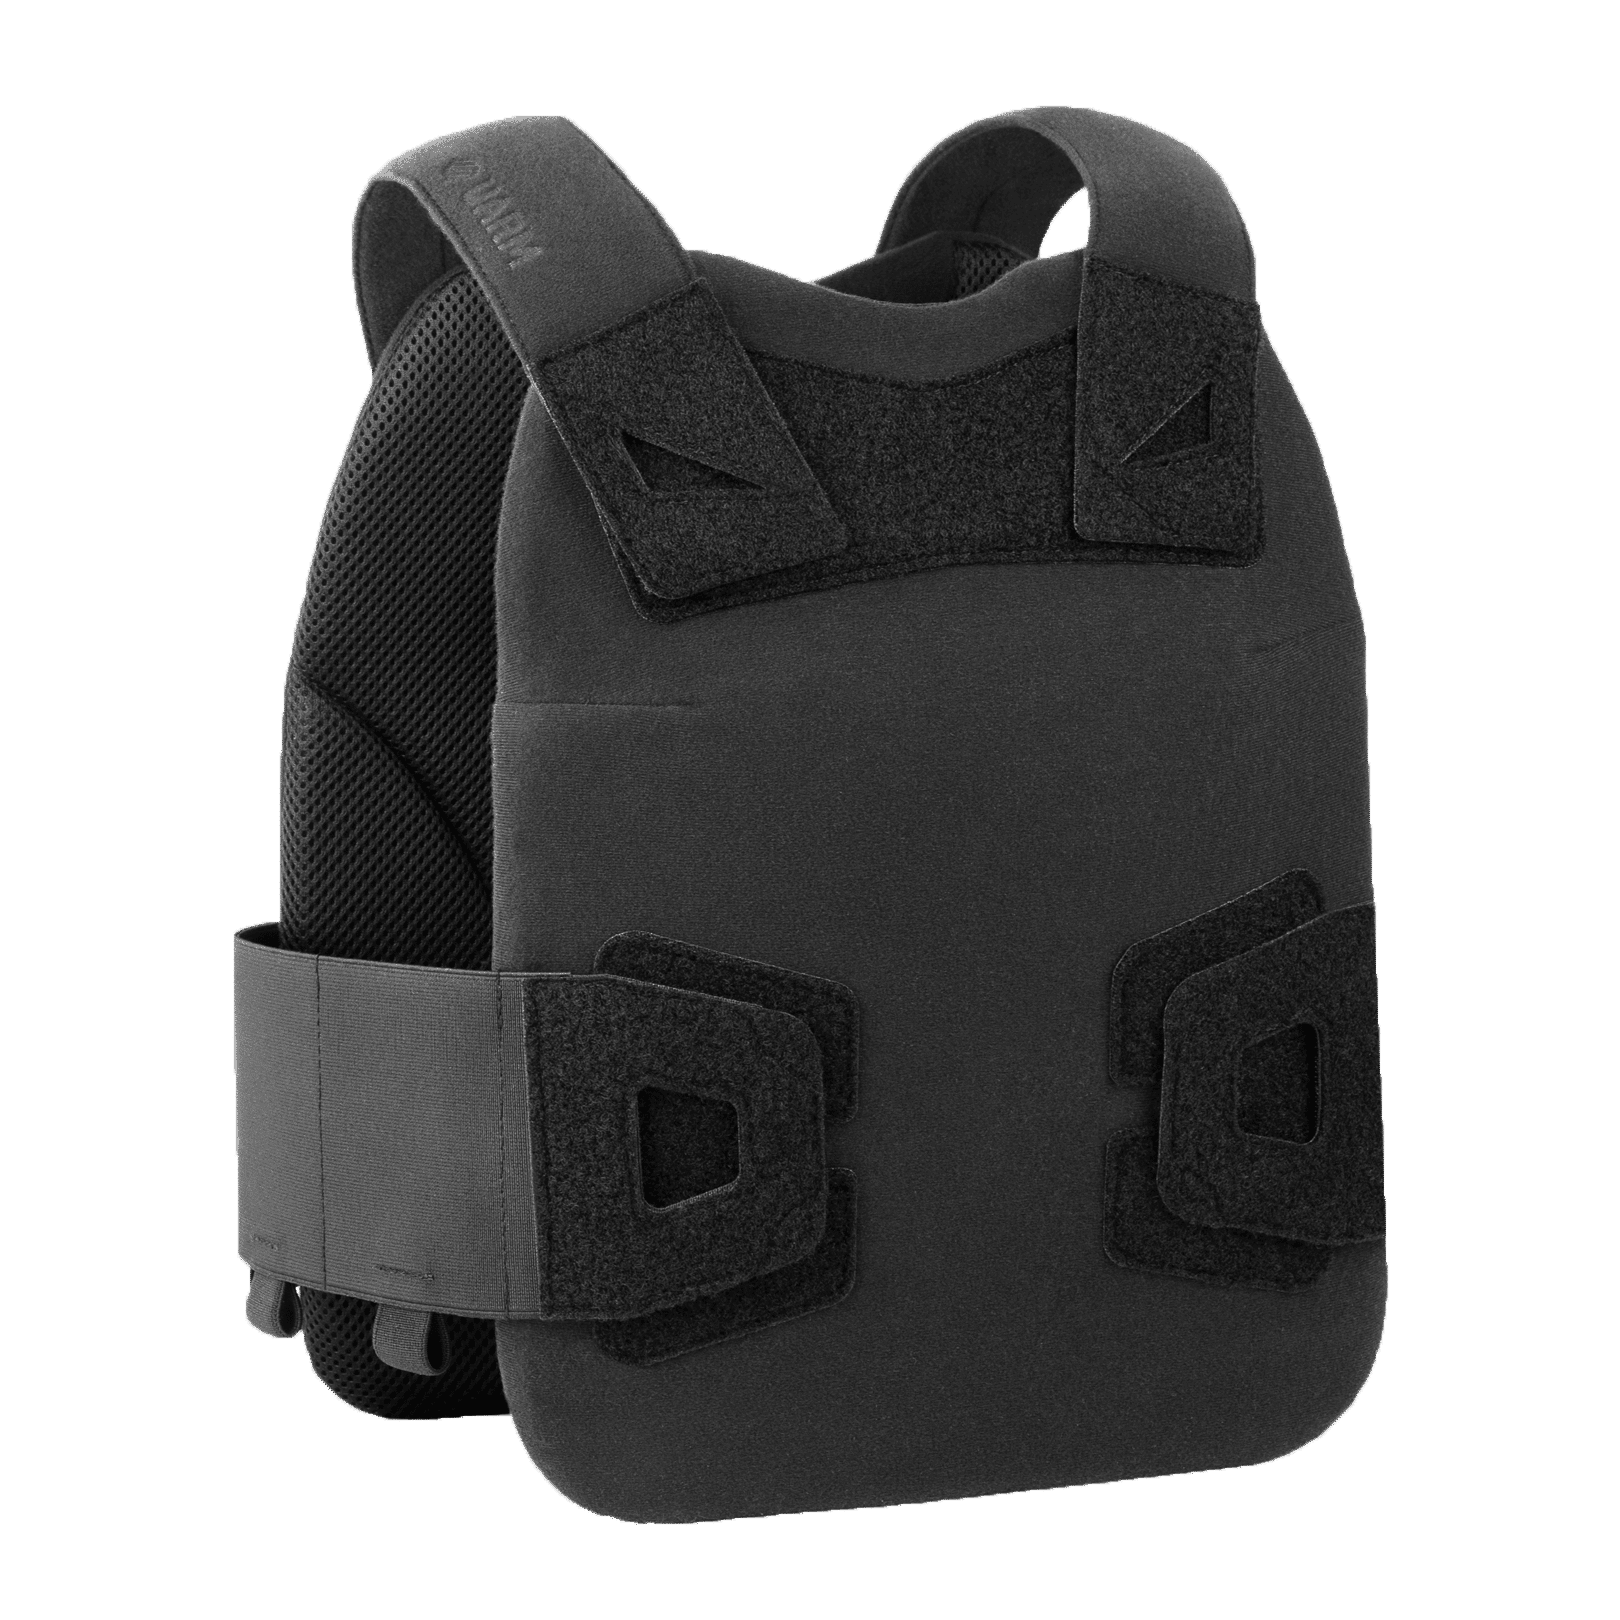 Concealable Vests